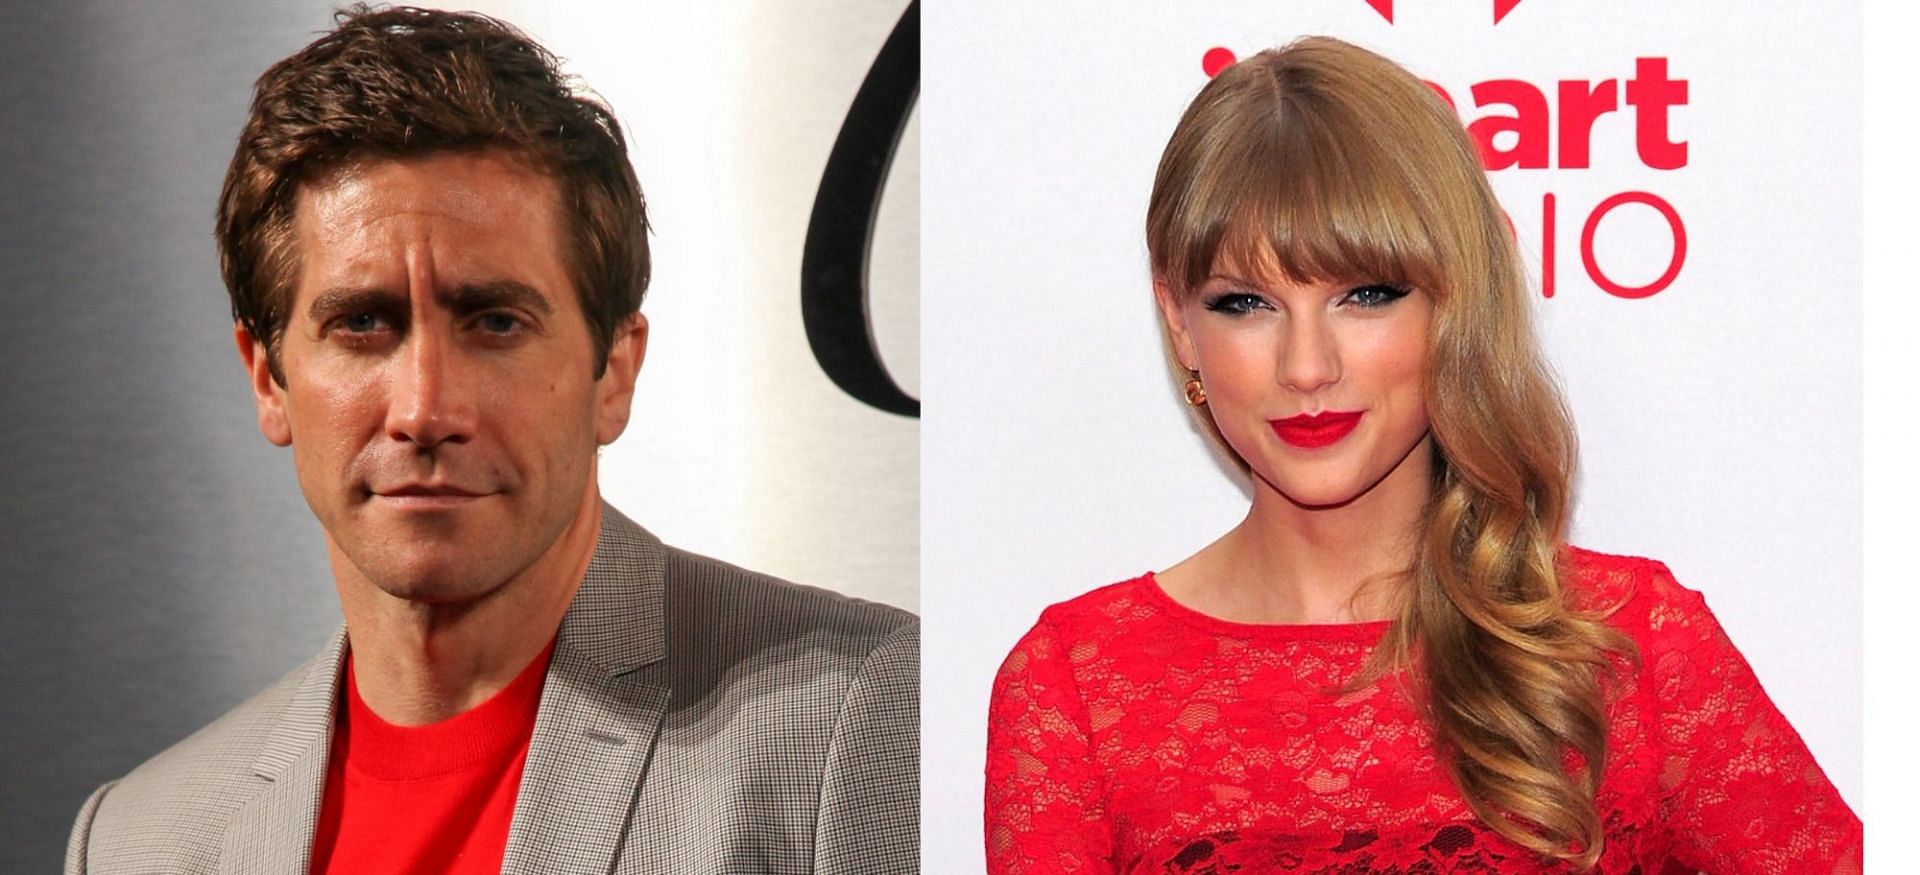 Jake Gyllenhaal sent Taylor Swift&#039;s fans into a frenzy with a new Red-themed photoshoot (Image via Kelly Sullivan/Getty Images and Steven Lawton/Getty Images)